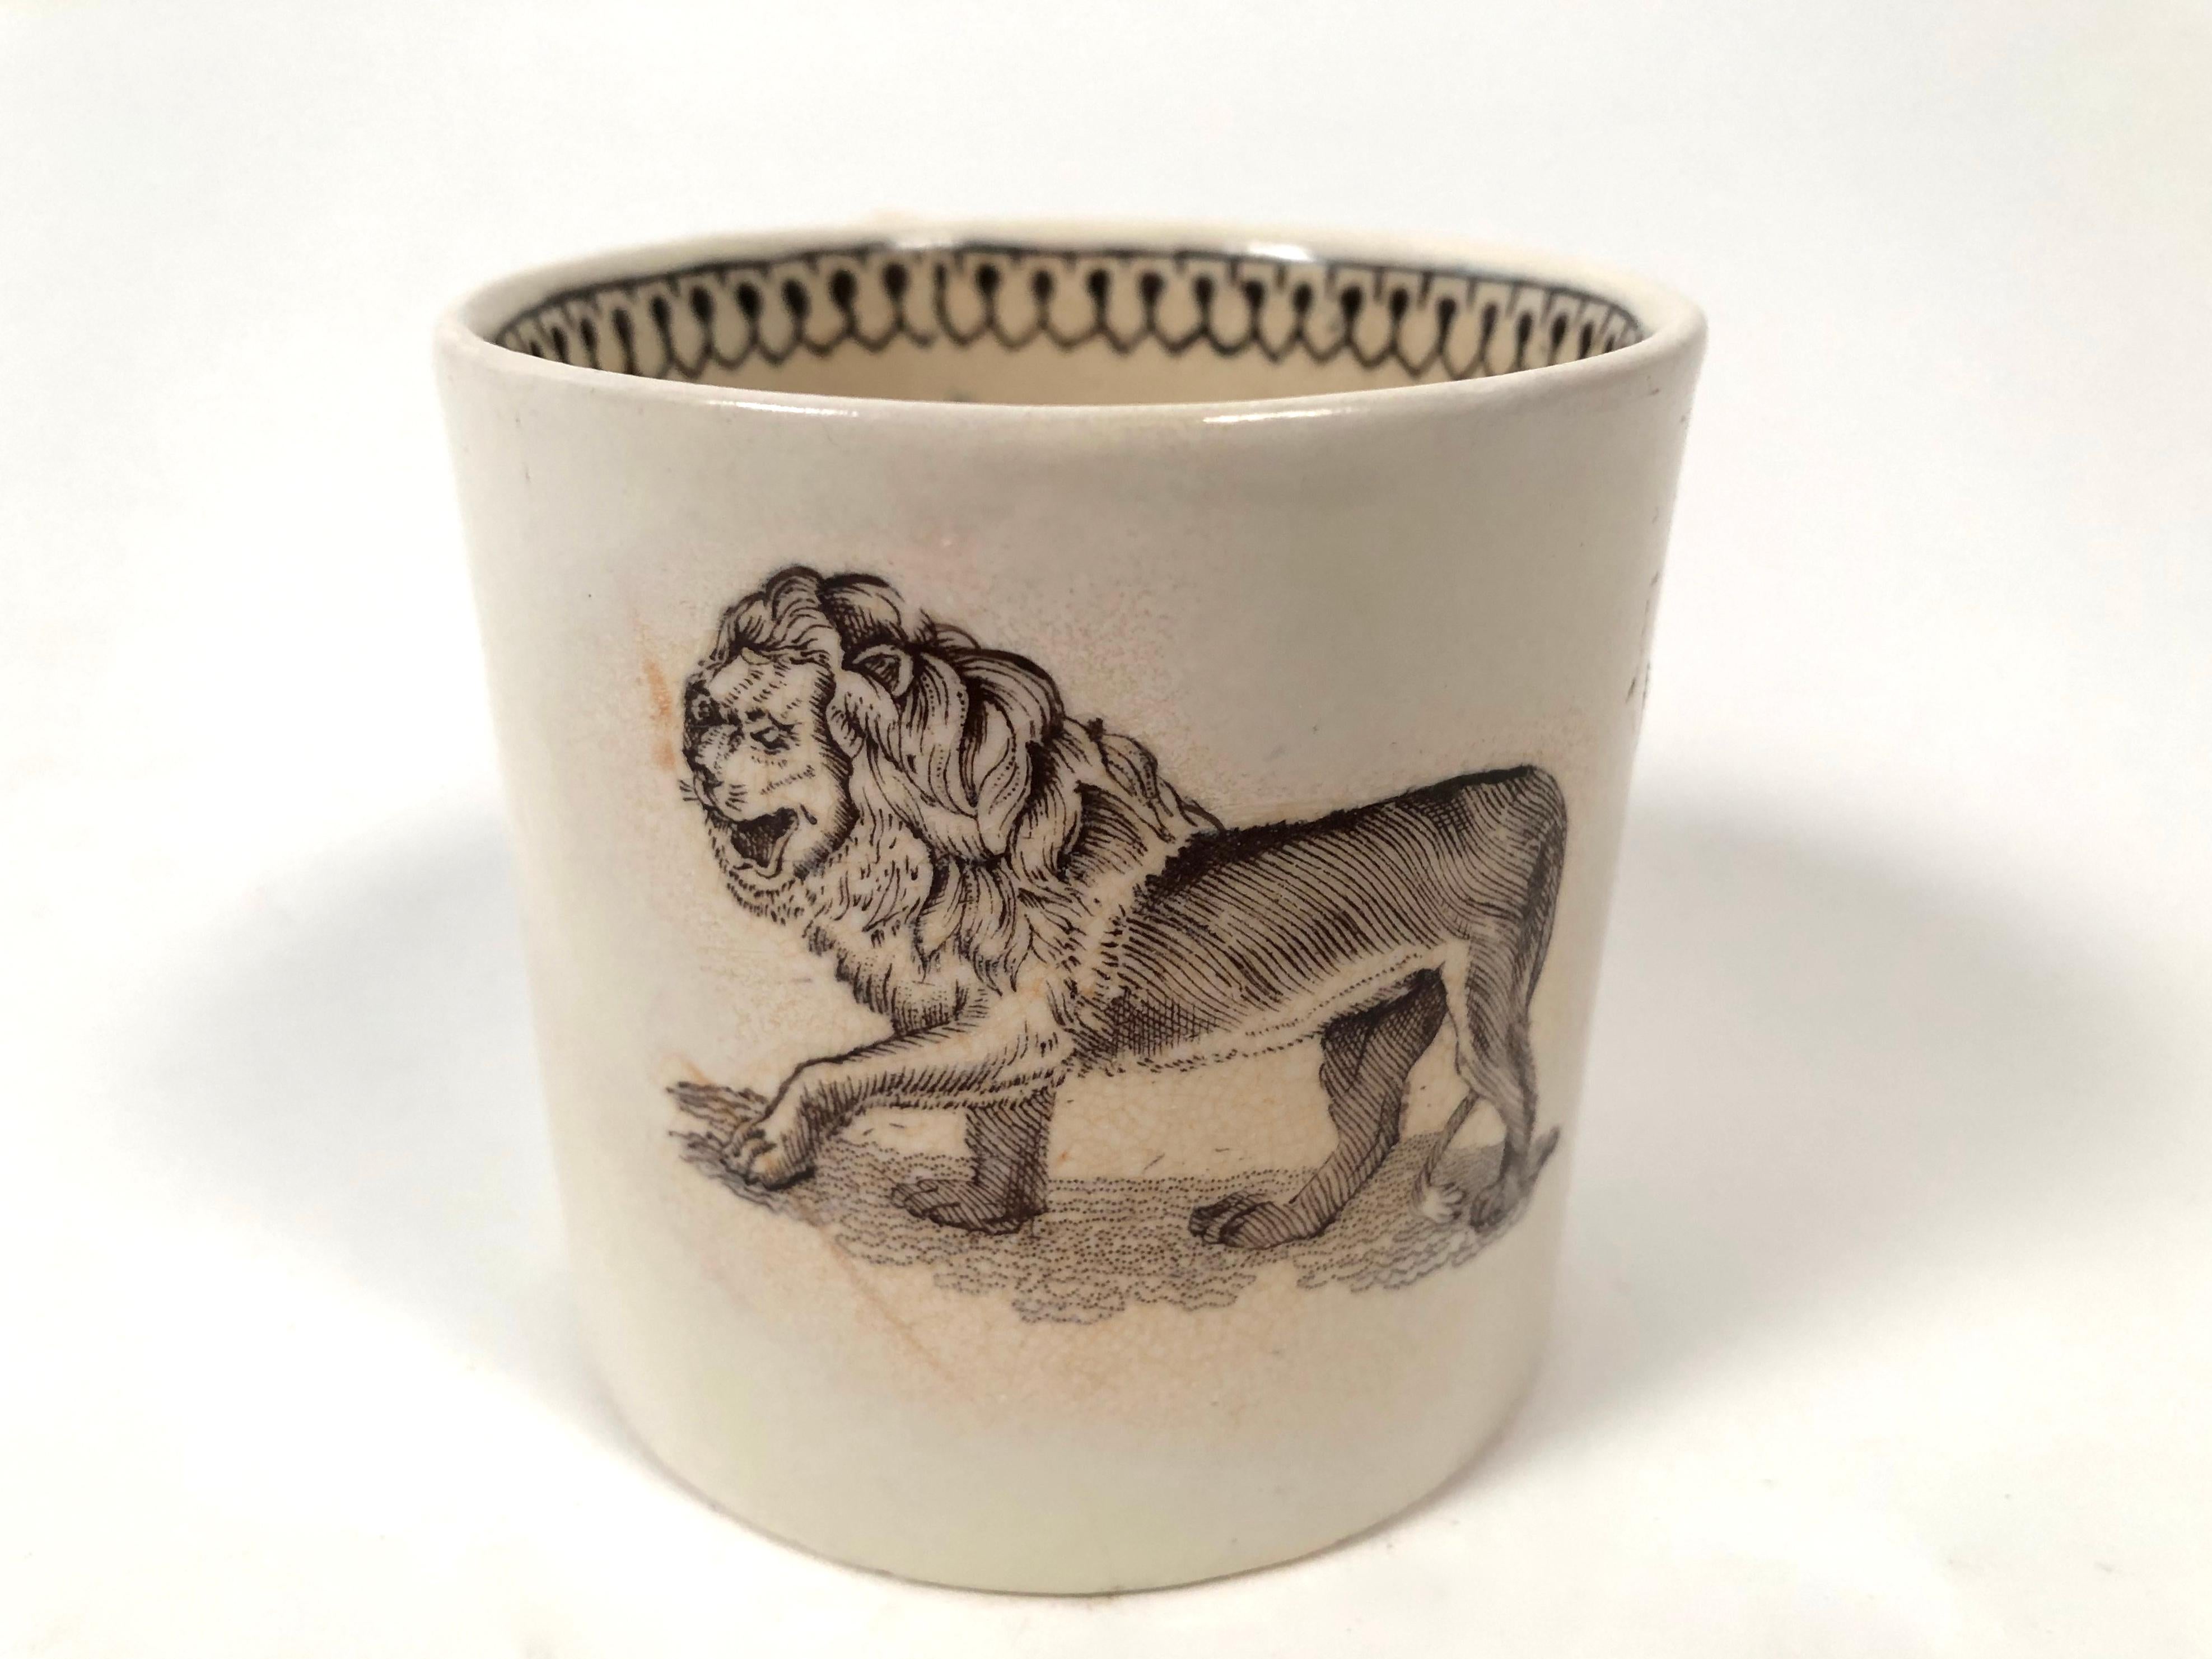 A charming 19th century English Staffordshire pottery brown transferware child size mug with an image of a striding lion on the exterior and a geometric band on the interior rim, circa 1810. Perfect for the Leo or lion lover in your life.